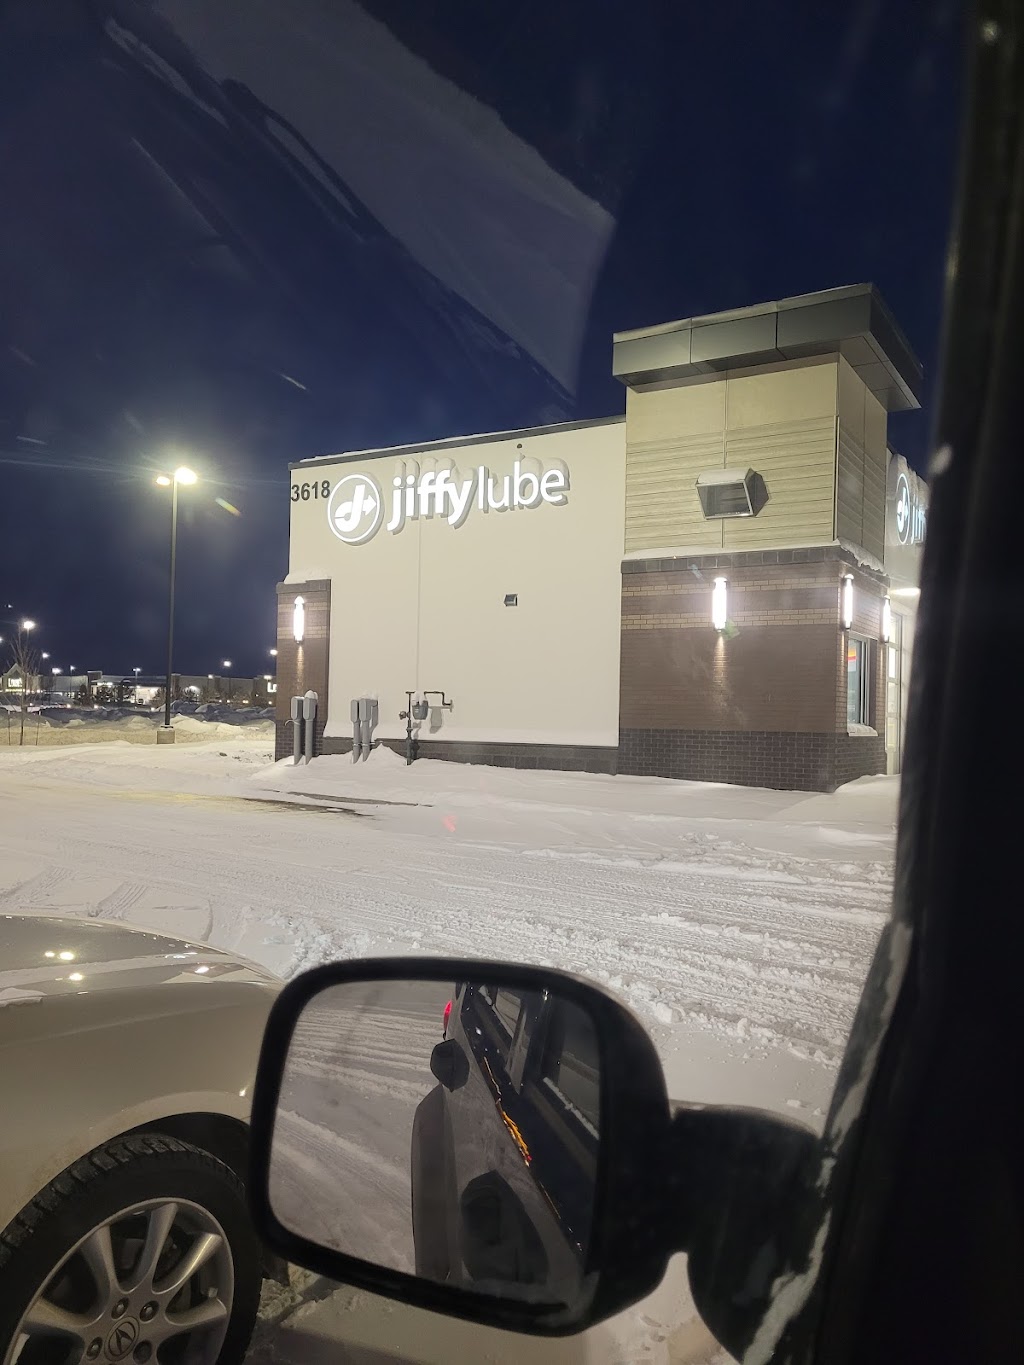 Jiffy Lube | 3618 153 Ave NW, Edmonton, AB T5Y 0S5, Canada | Phone: (587) 460-5074